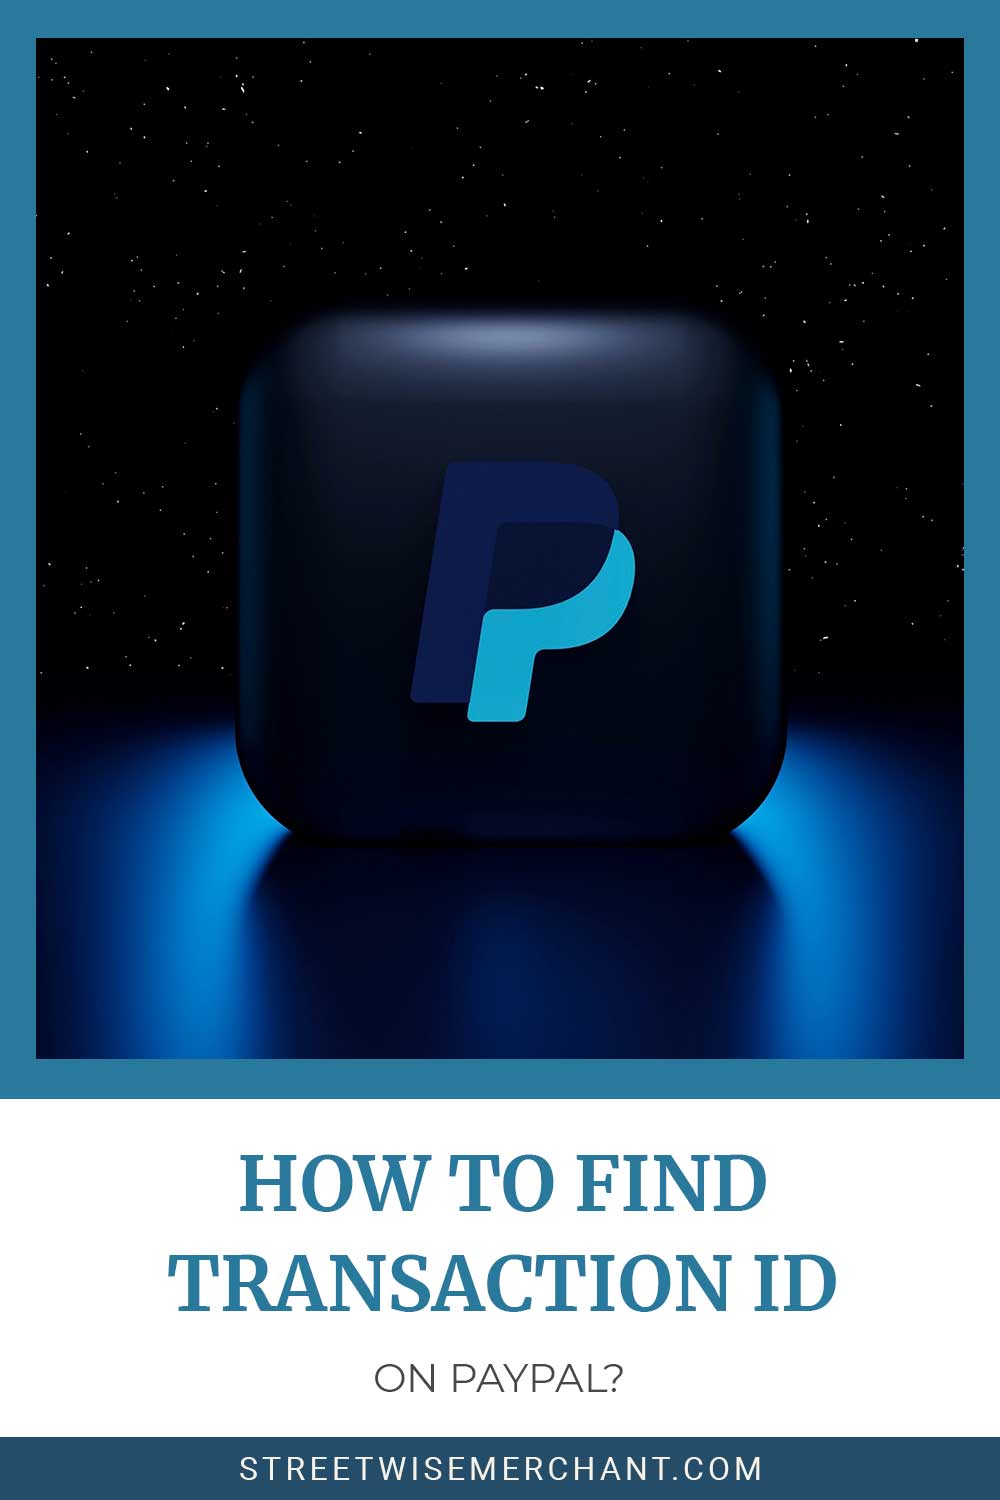 How To Find Transaction Id On Paypal?